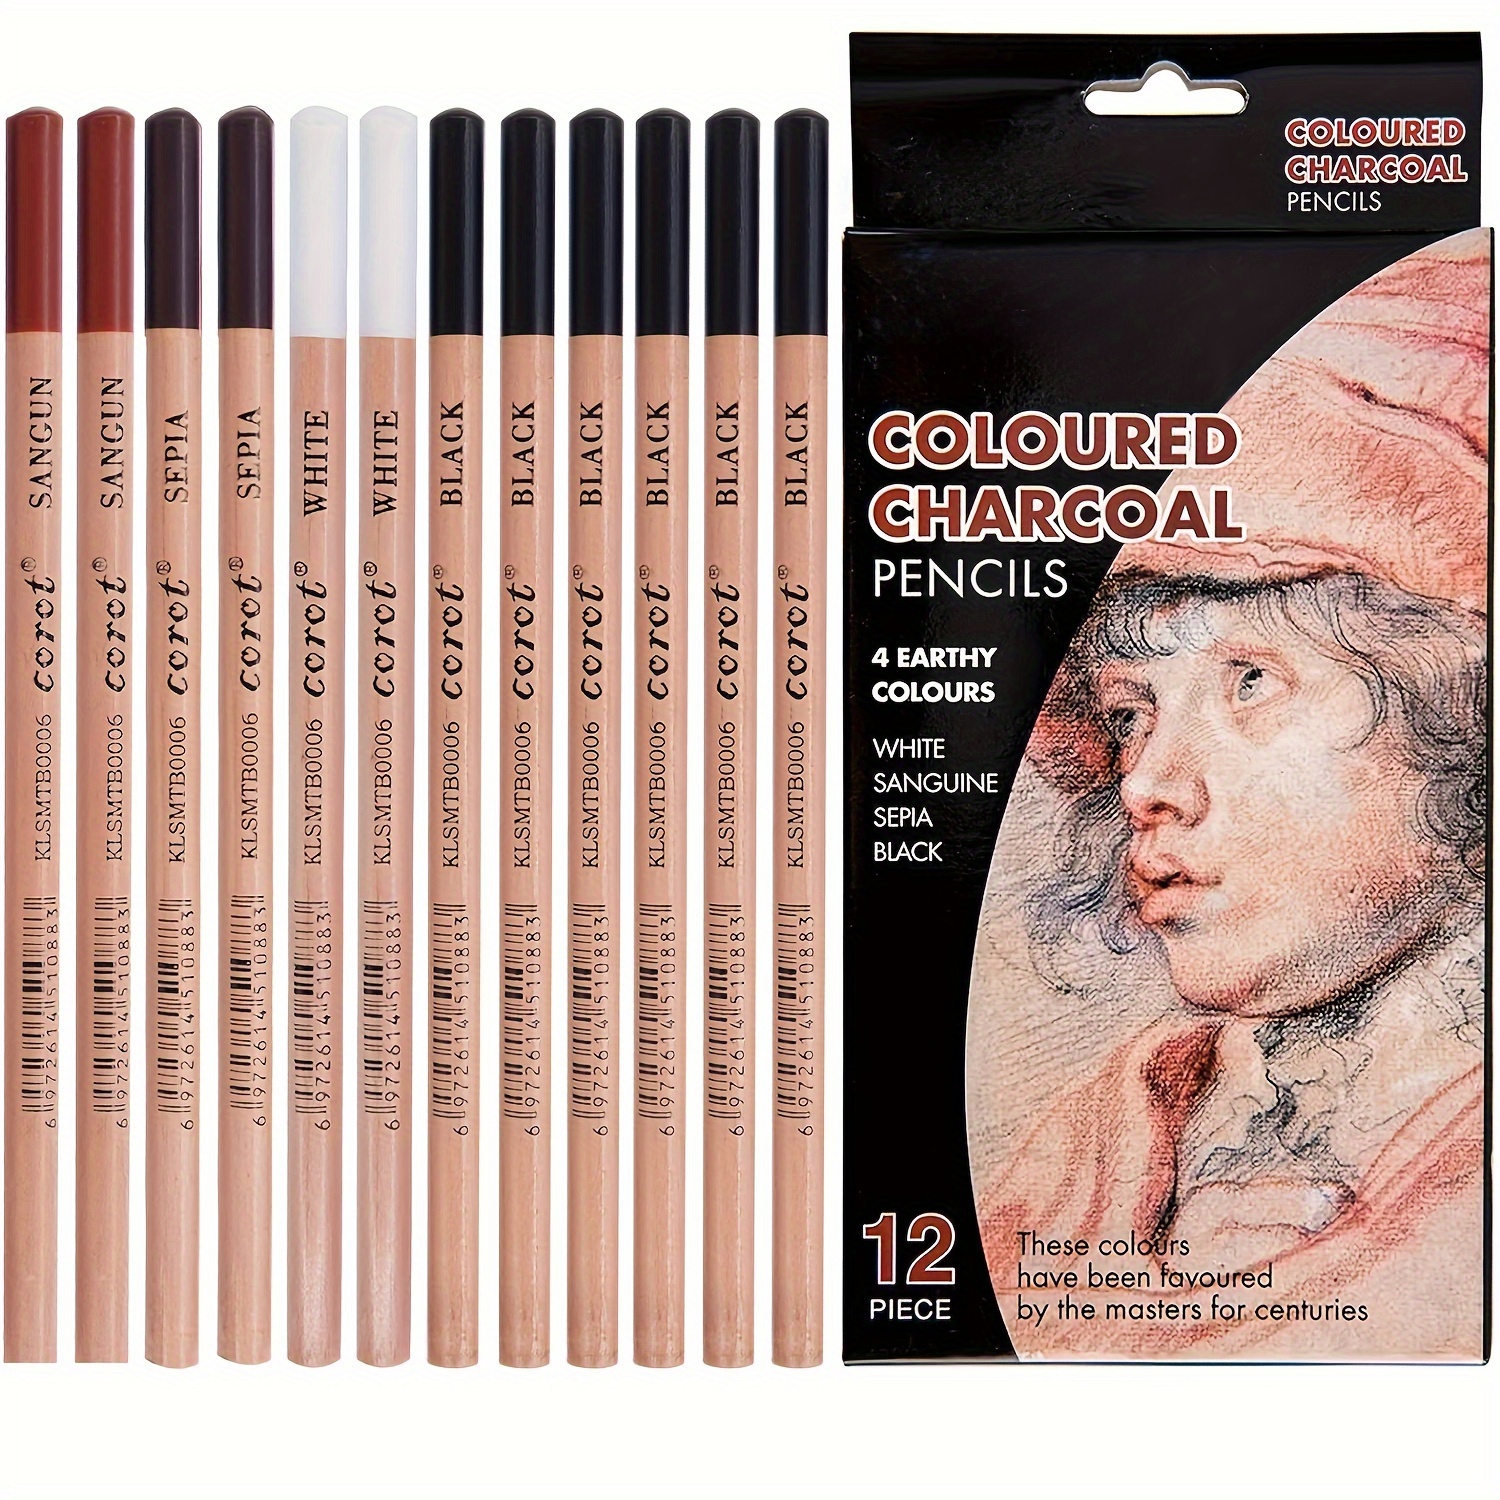 LOONENG Willow Charcoal Sticks, Natural Willow Charcoal for Artists,  Beginners or Kids of All Skill Levels, Great for Sketching, Drawing and  Shading